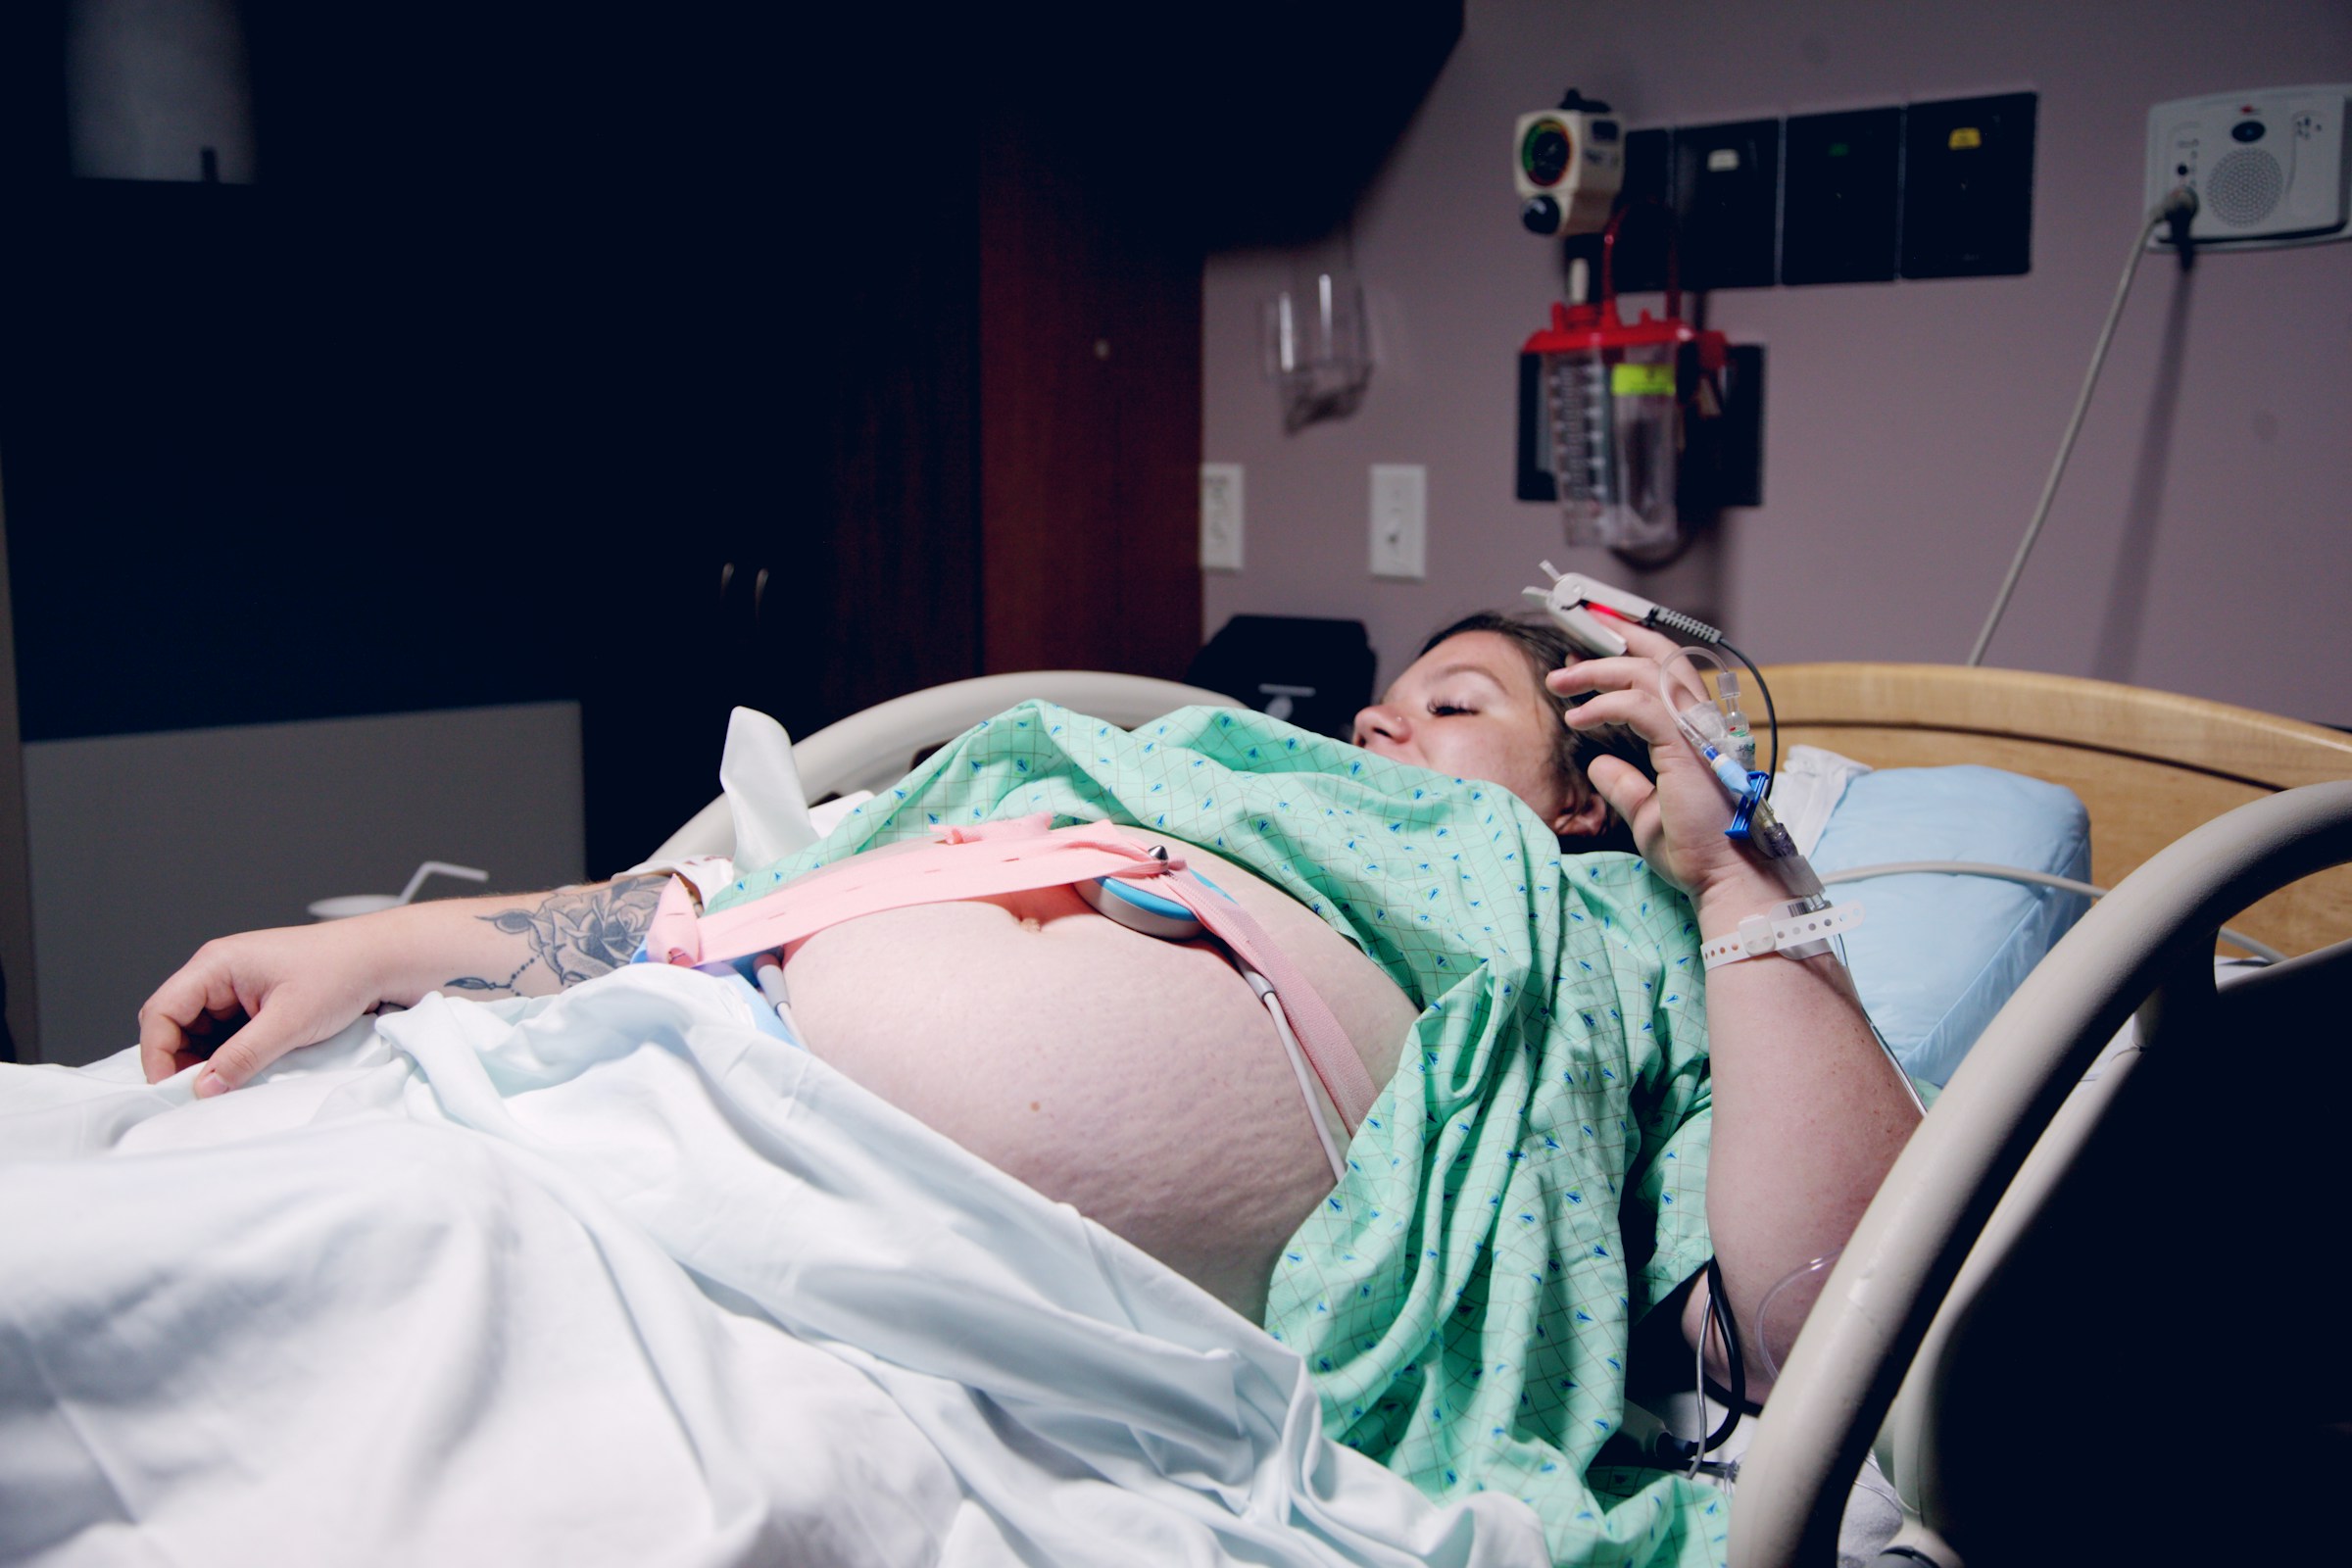 A woman in labor in hospital | Source: Unsplash